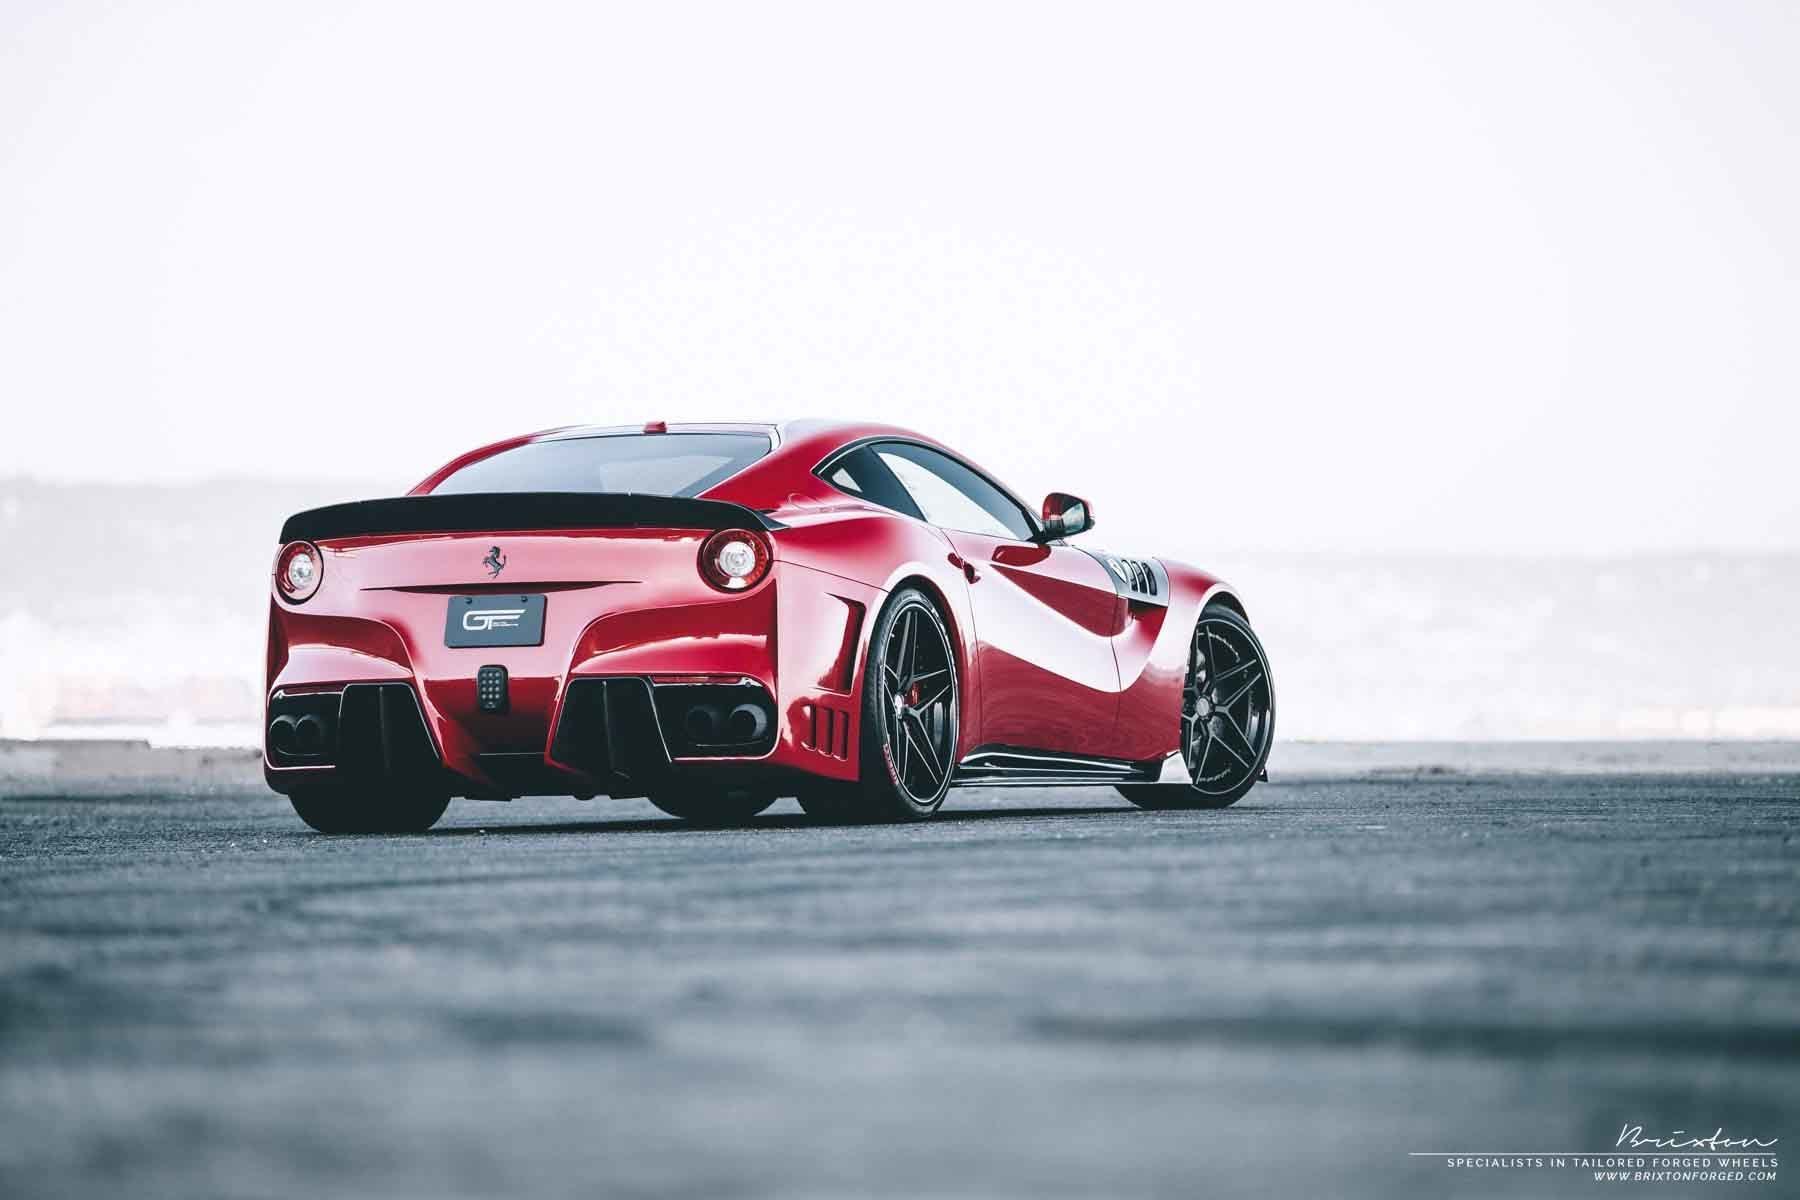 images-products-1-2461-232974749-red-ferrari-f12-berlinetta-svr-kit-brixton-forged-wr7-targa-series-forged-wheels-3-piece-concave.jpg